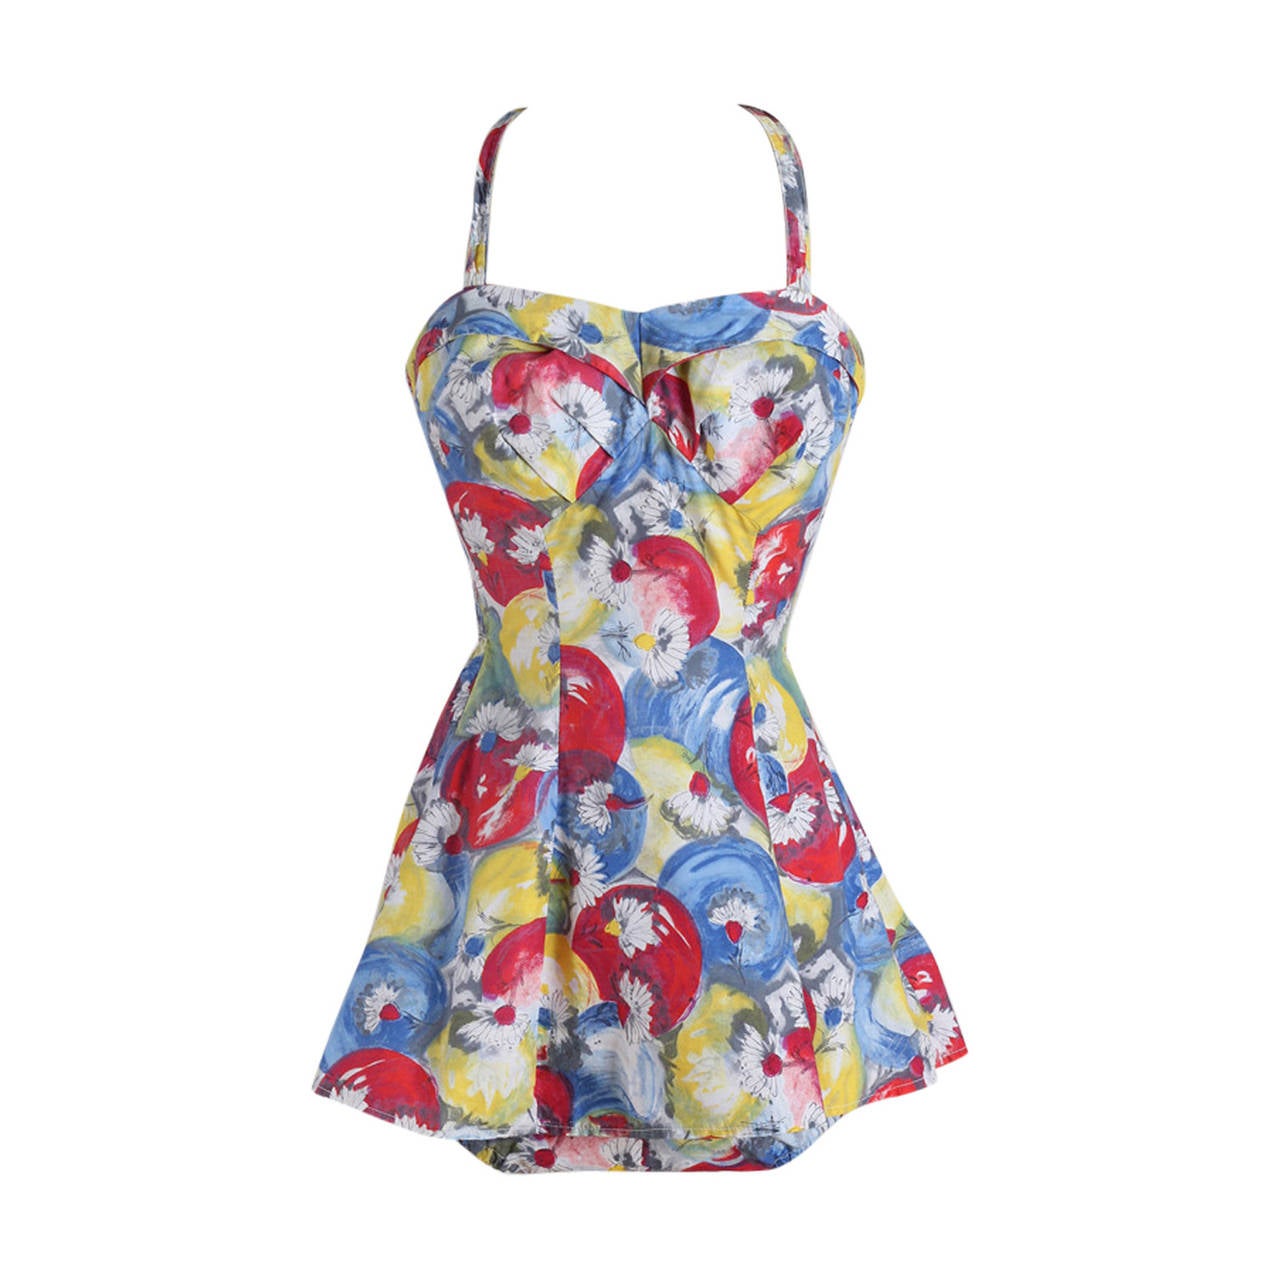 Vintage 1950s Kittiwake Red and Blue Watercolor Cotton Swimsuit